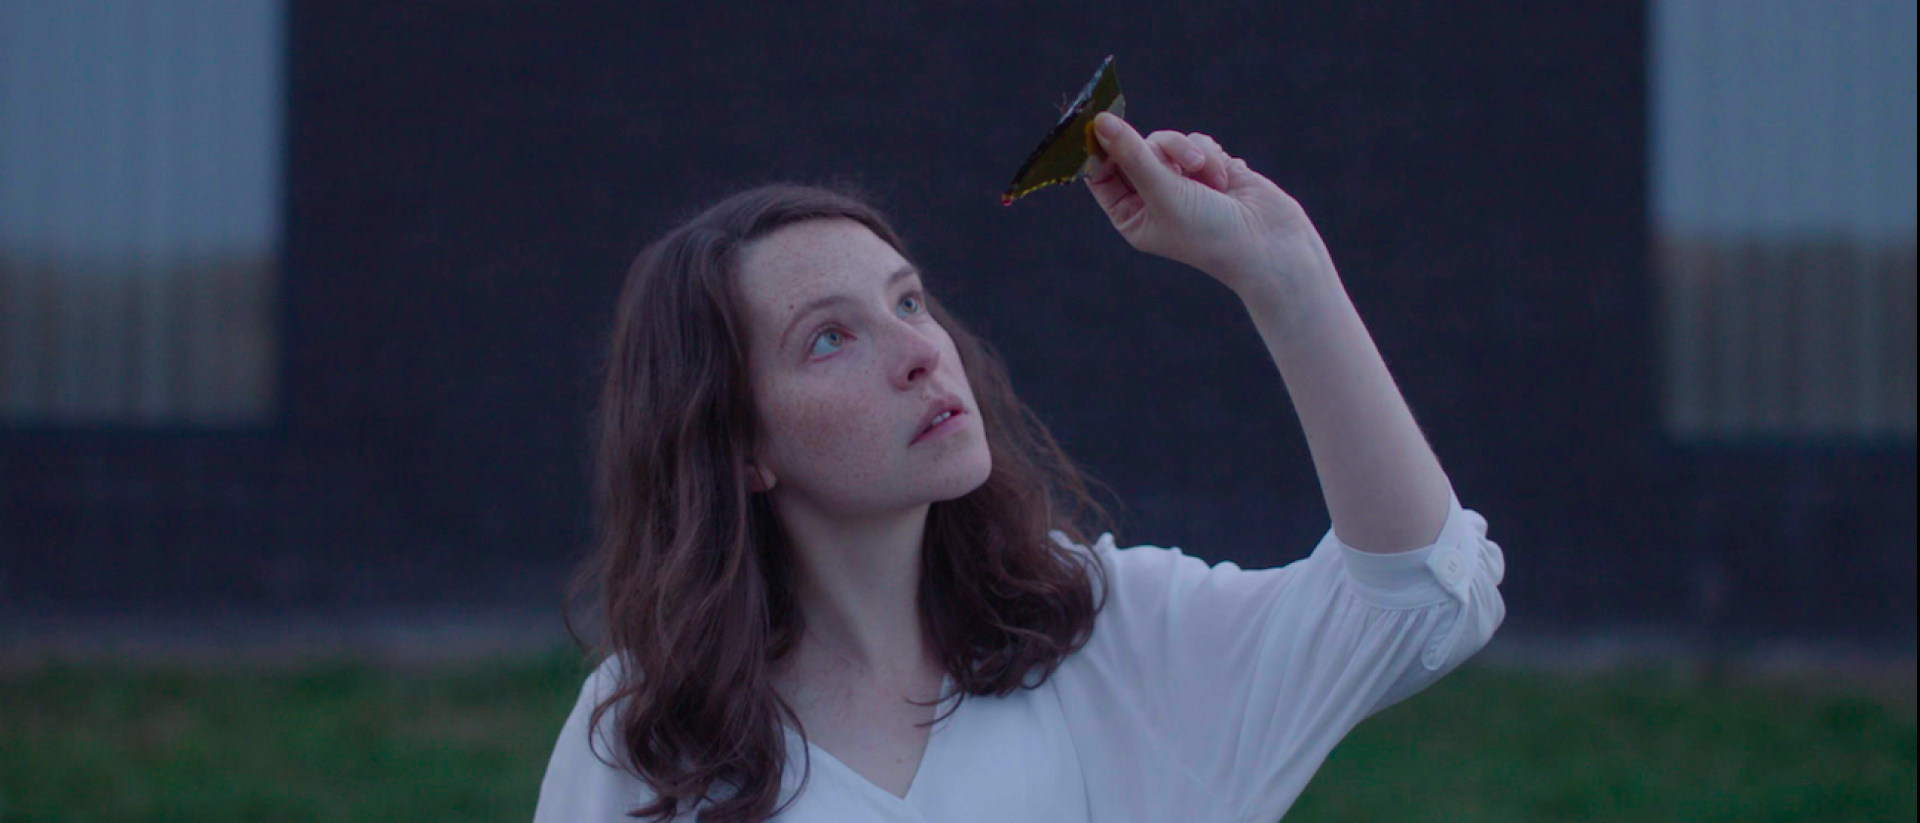 still from Gwledd / The Feast featuring annes elwy wearing a white blouse, standing outside and holding a piece of broken wine bottle up to look at it